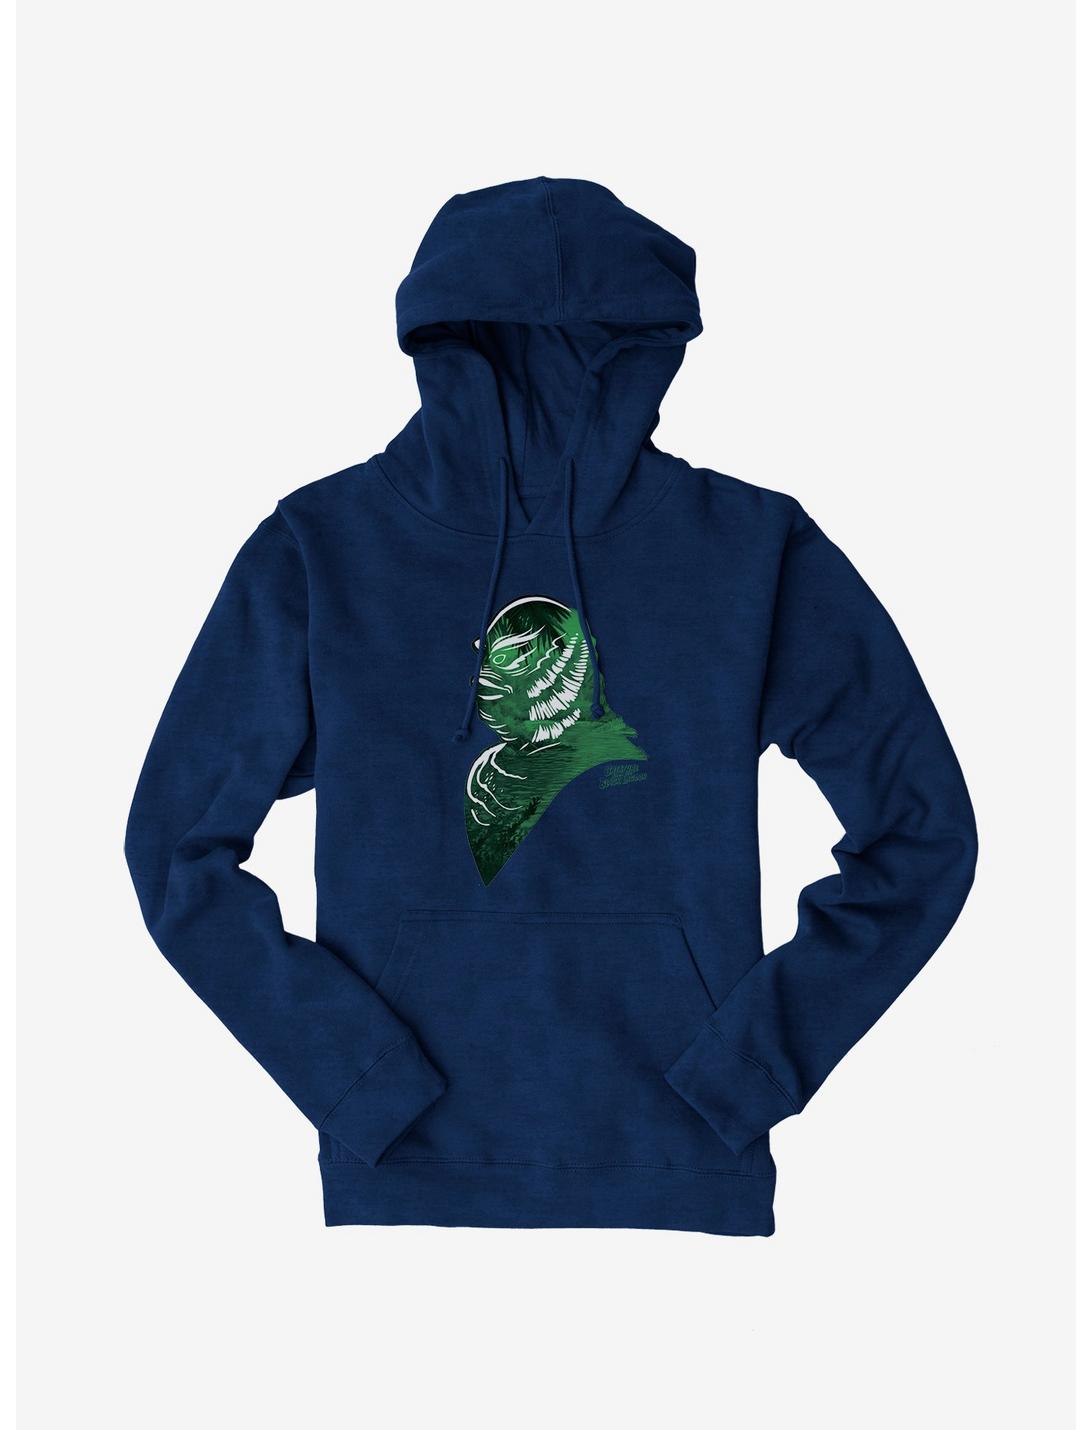 Universal Monsters Creature From The Black Lagoon Amazon Profile Hoodie, , hi-res